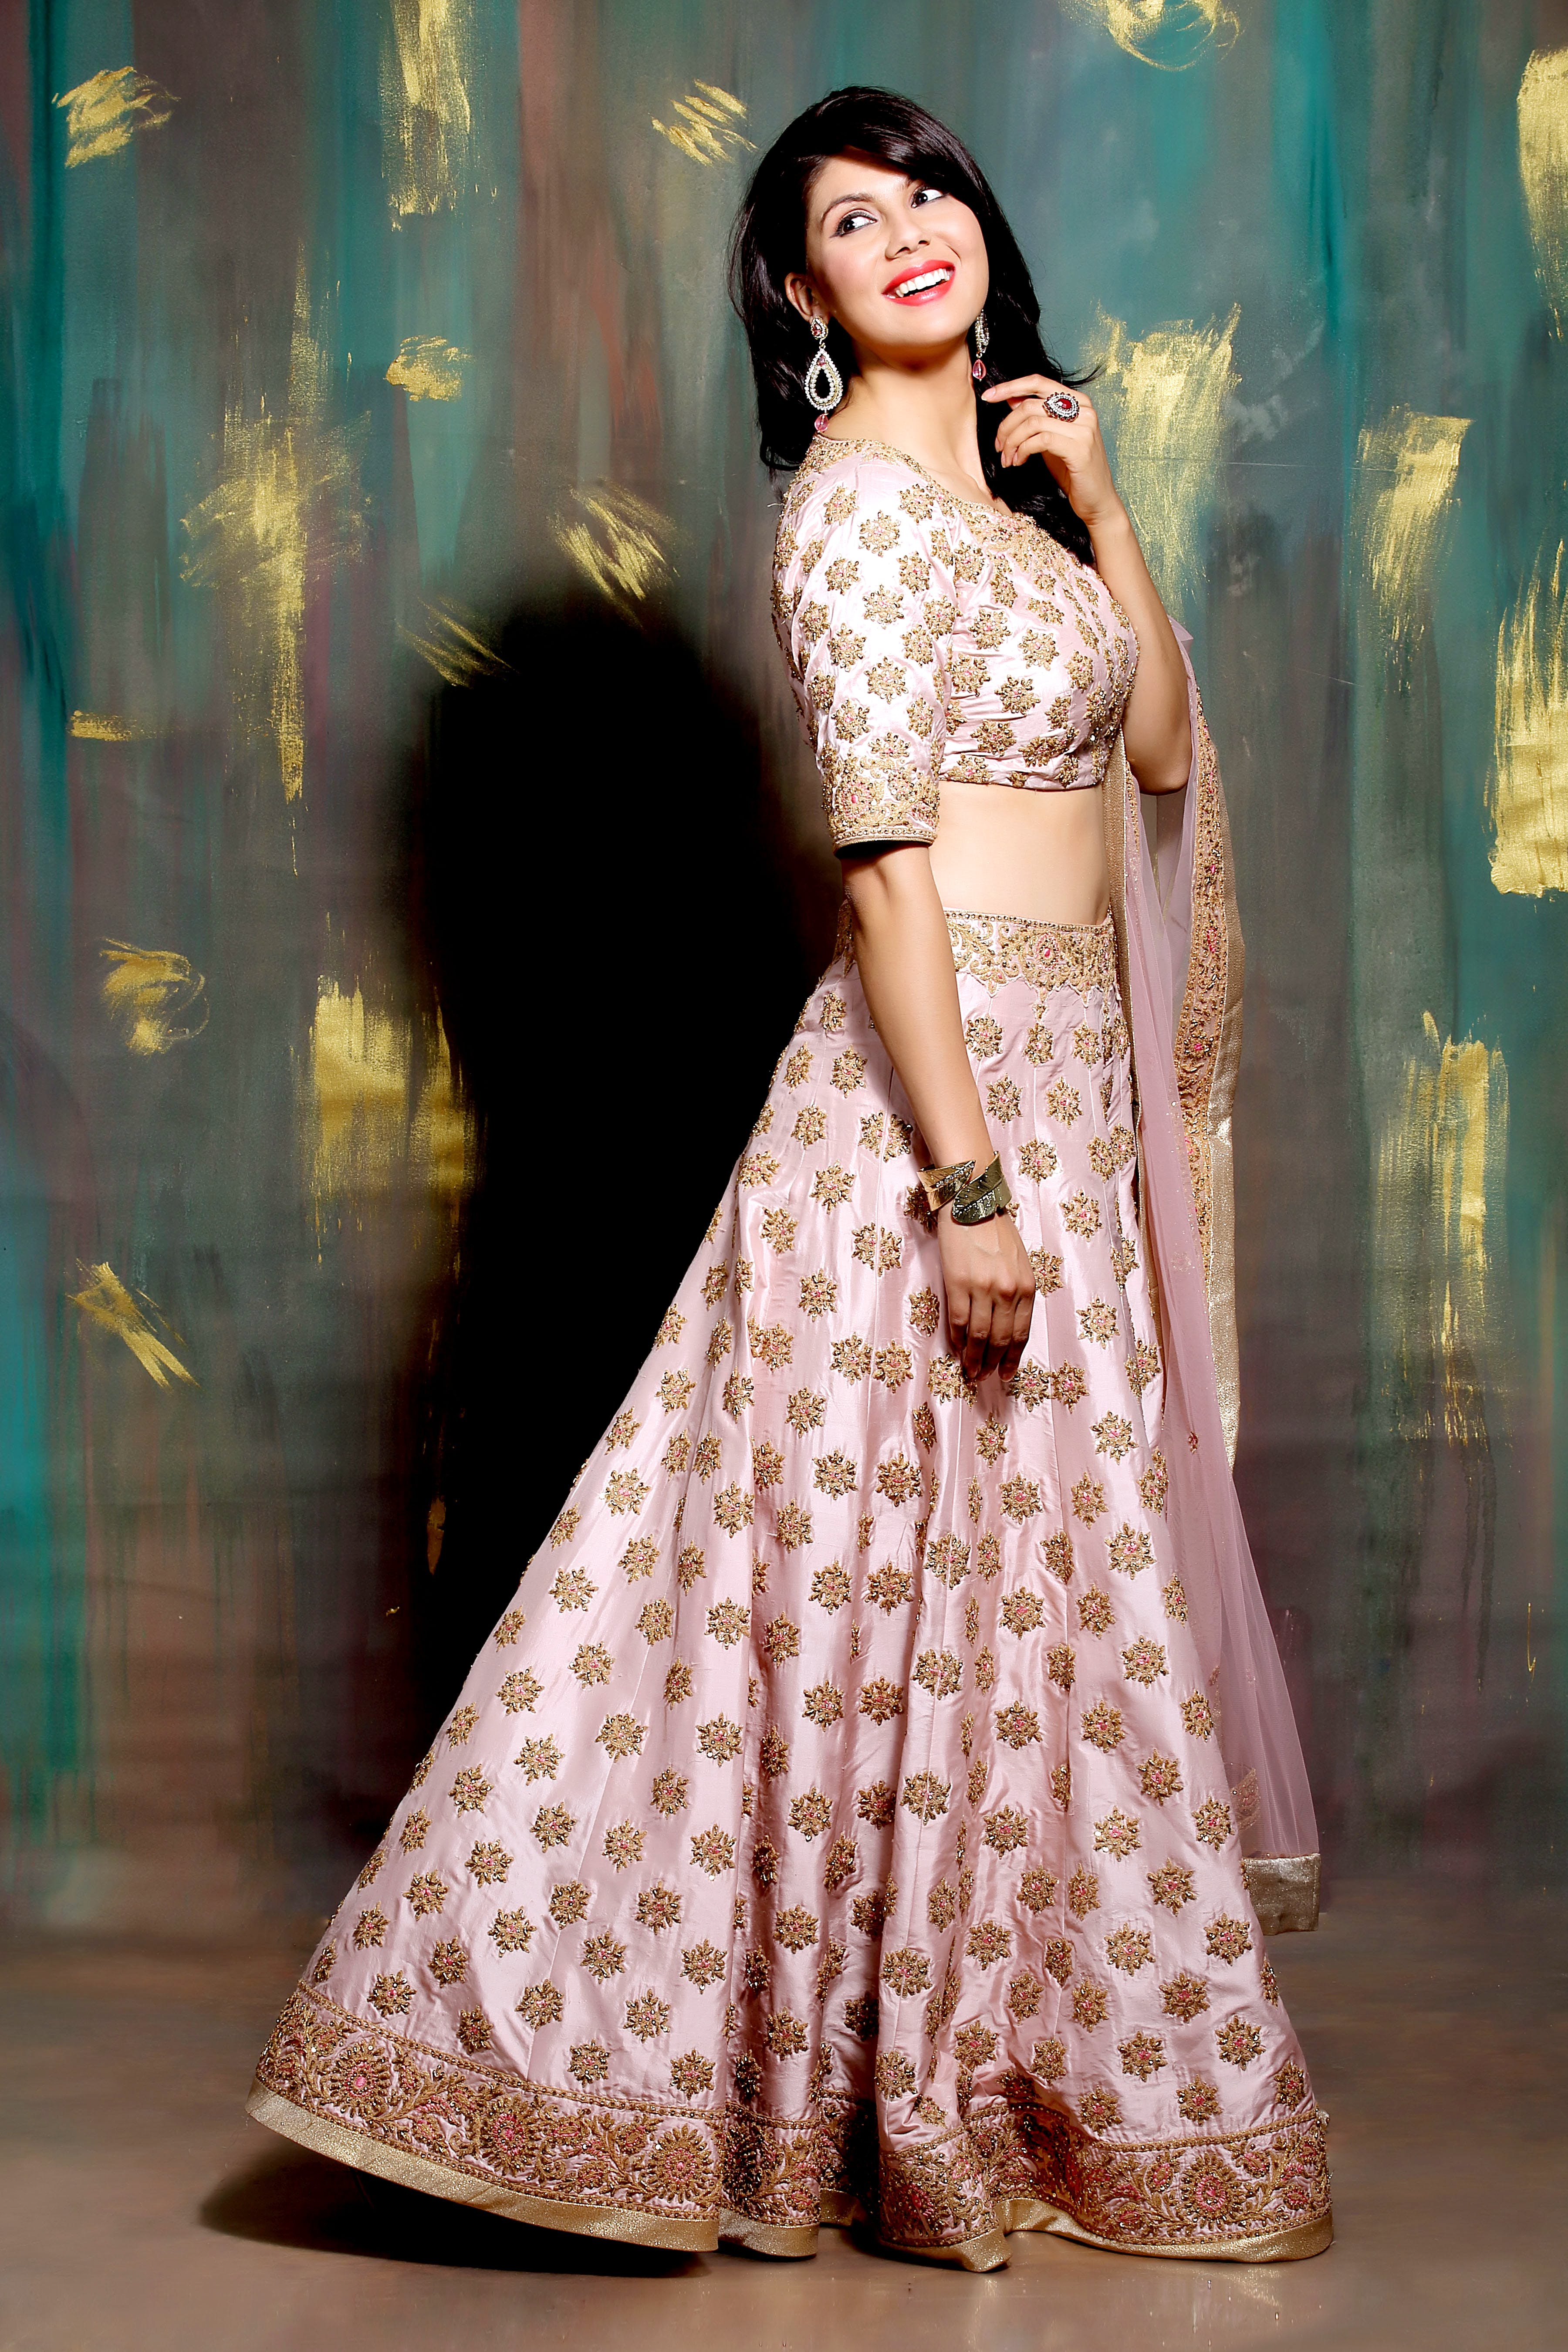 Brides These Light-Weight Lehengas Are The BEST Outfit For Your Summer  Wedding | WeddingBazaar